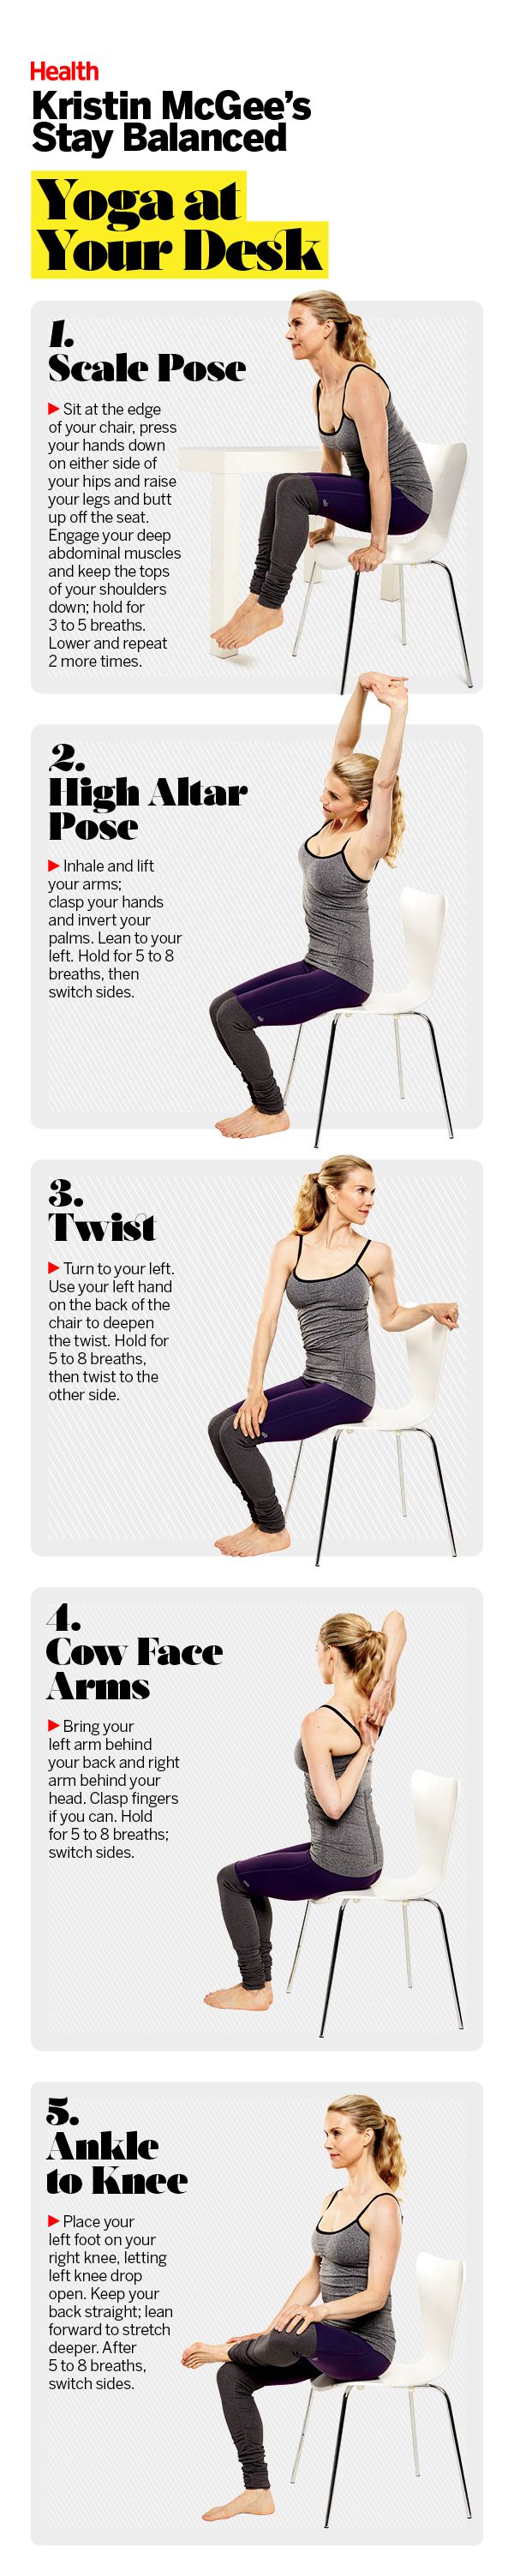 Best Yoga Poses Workouts 5 Yoga Poses You Can Do At Your Desk